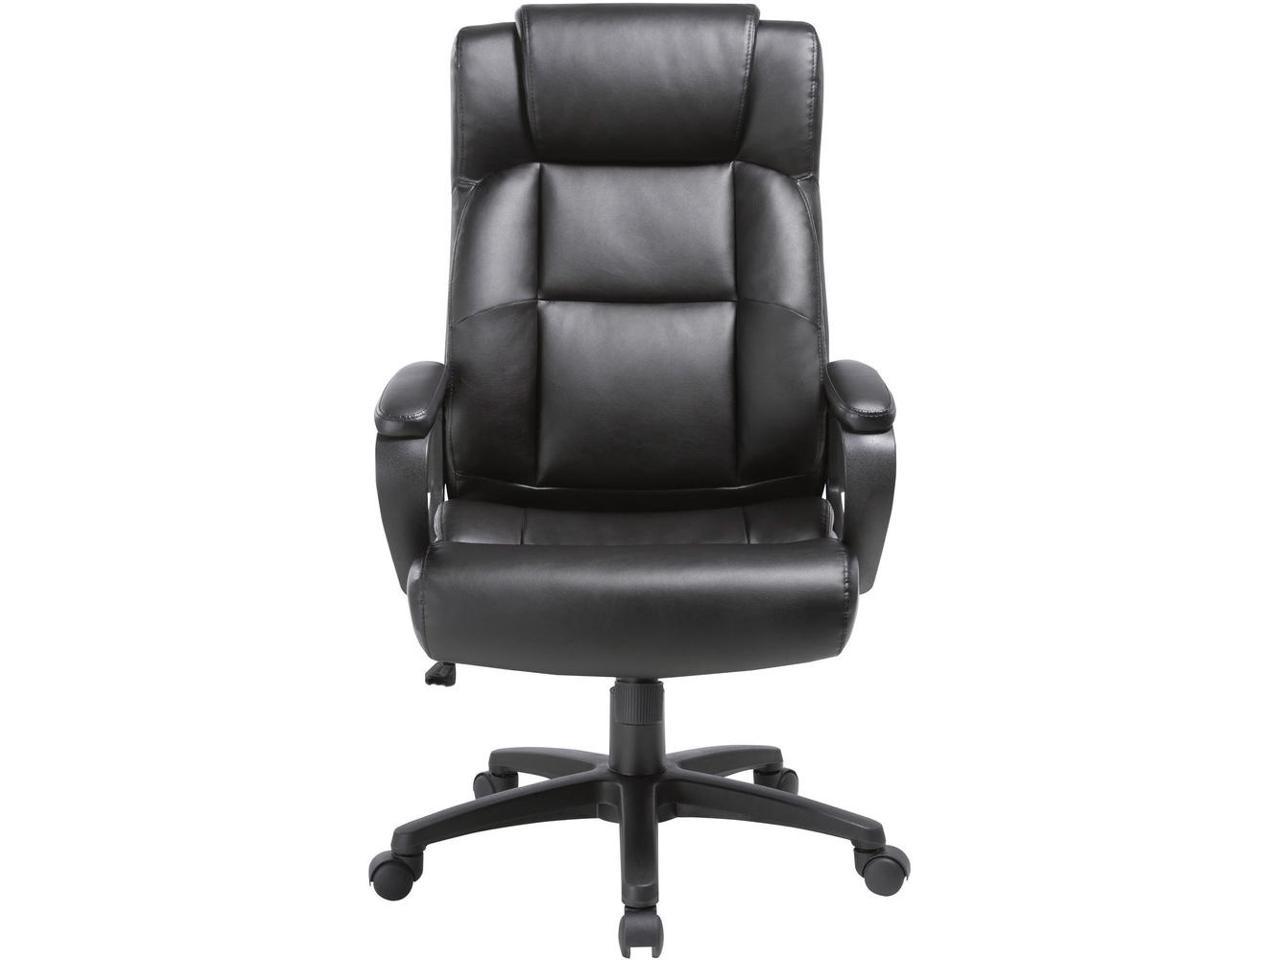 Lorell Soho High-back Leather Executive Chair - Black Bonded Leather Seat - Black Bonded Leather Back - 5-star Base - 18.39" Seat Width - 28.5" Length x 29" Width x 28" Depth x 46" Height - 1 Each - image 3 of 7